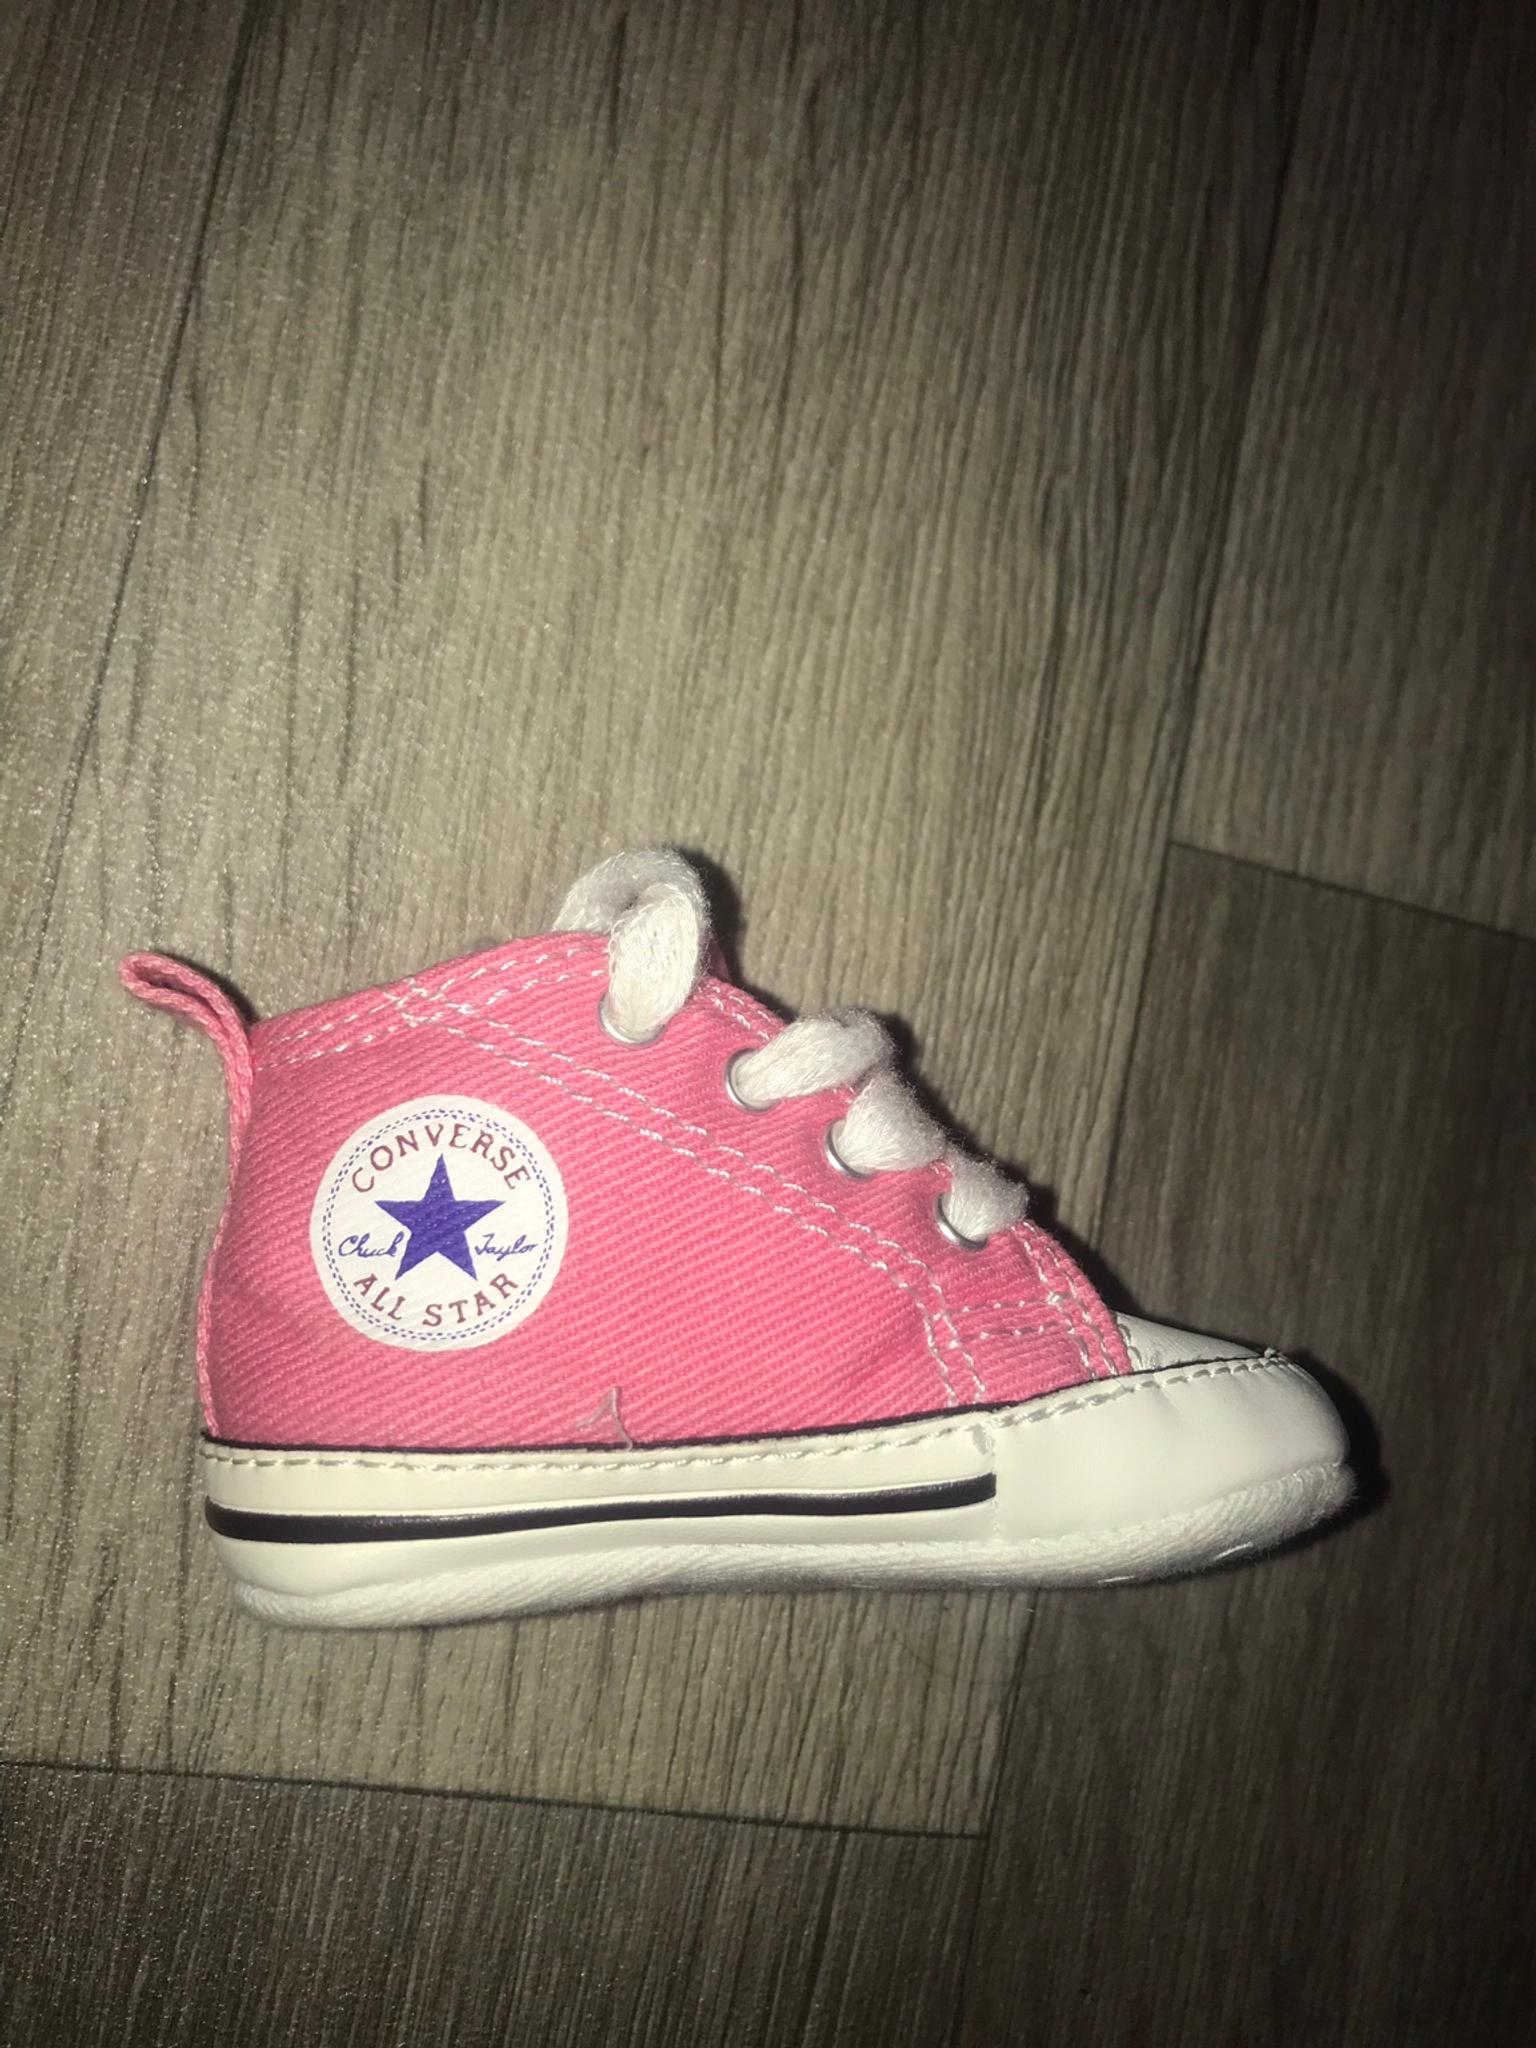 3 month old baby converse